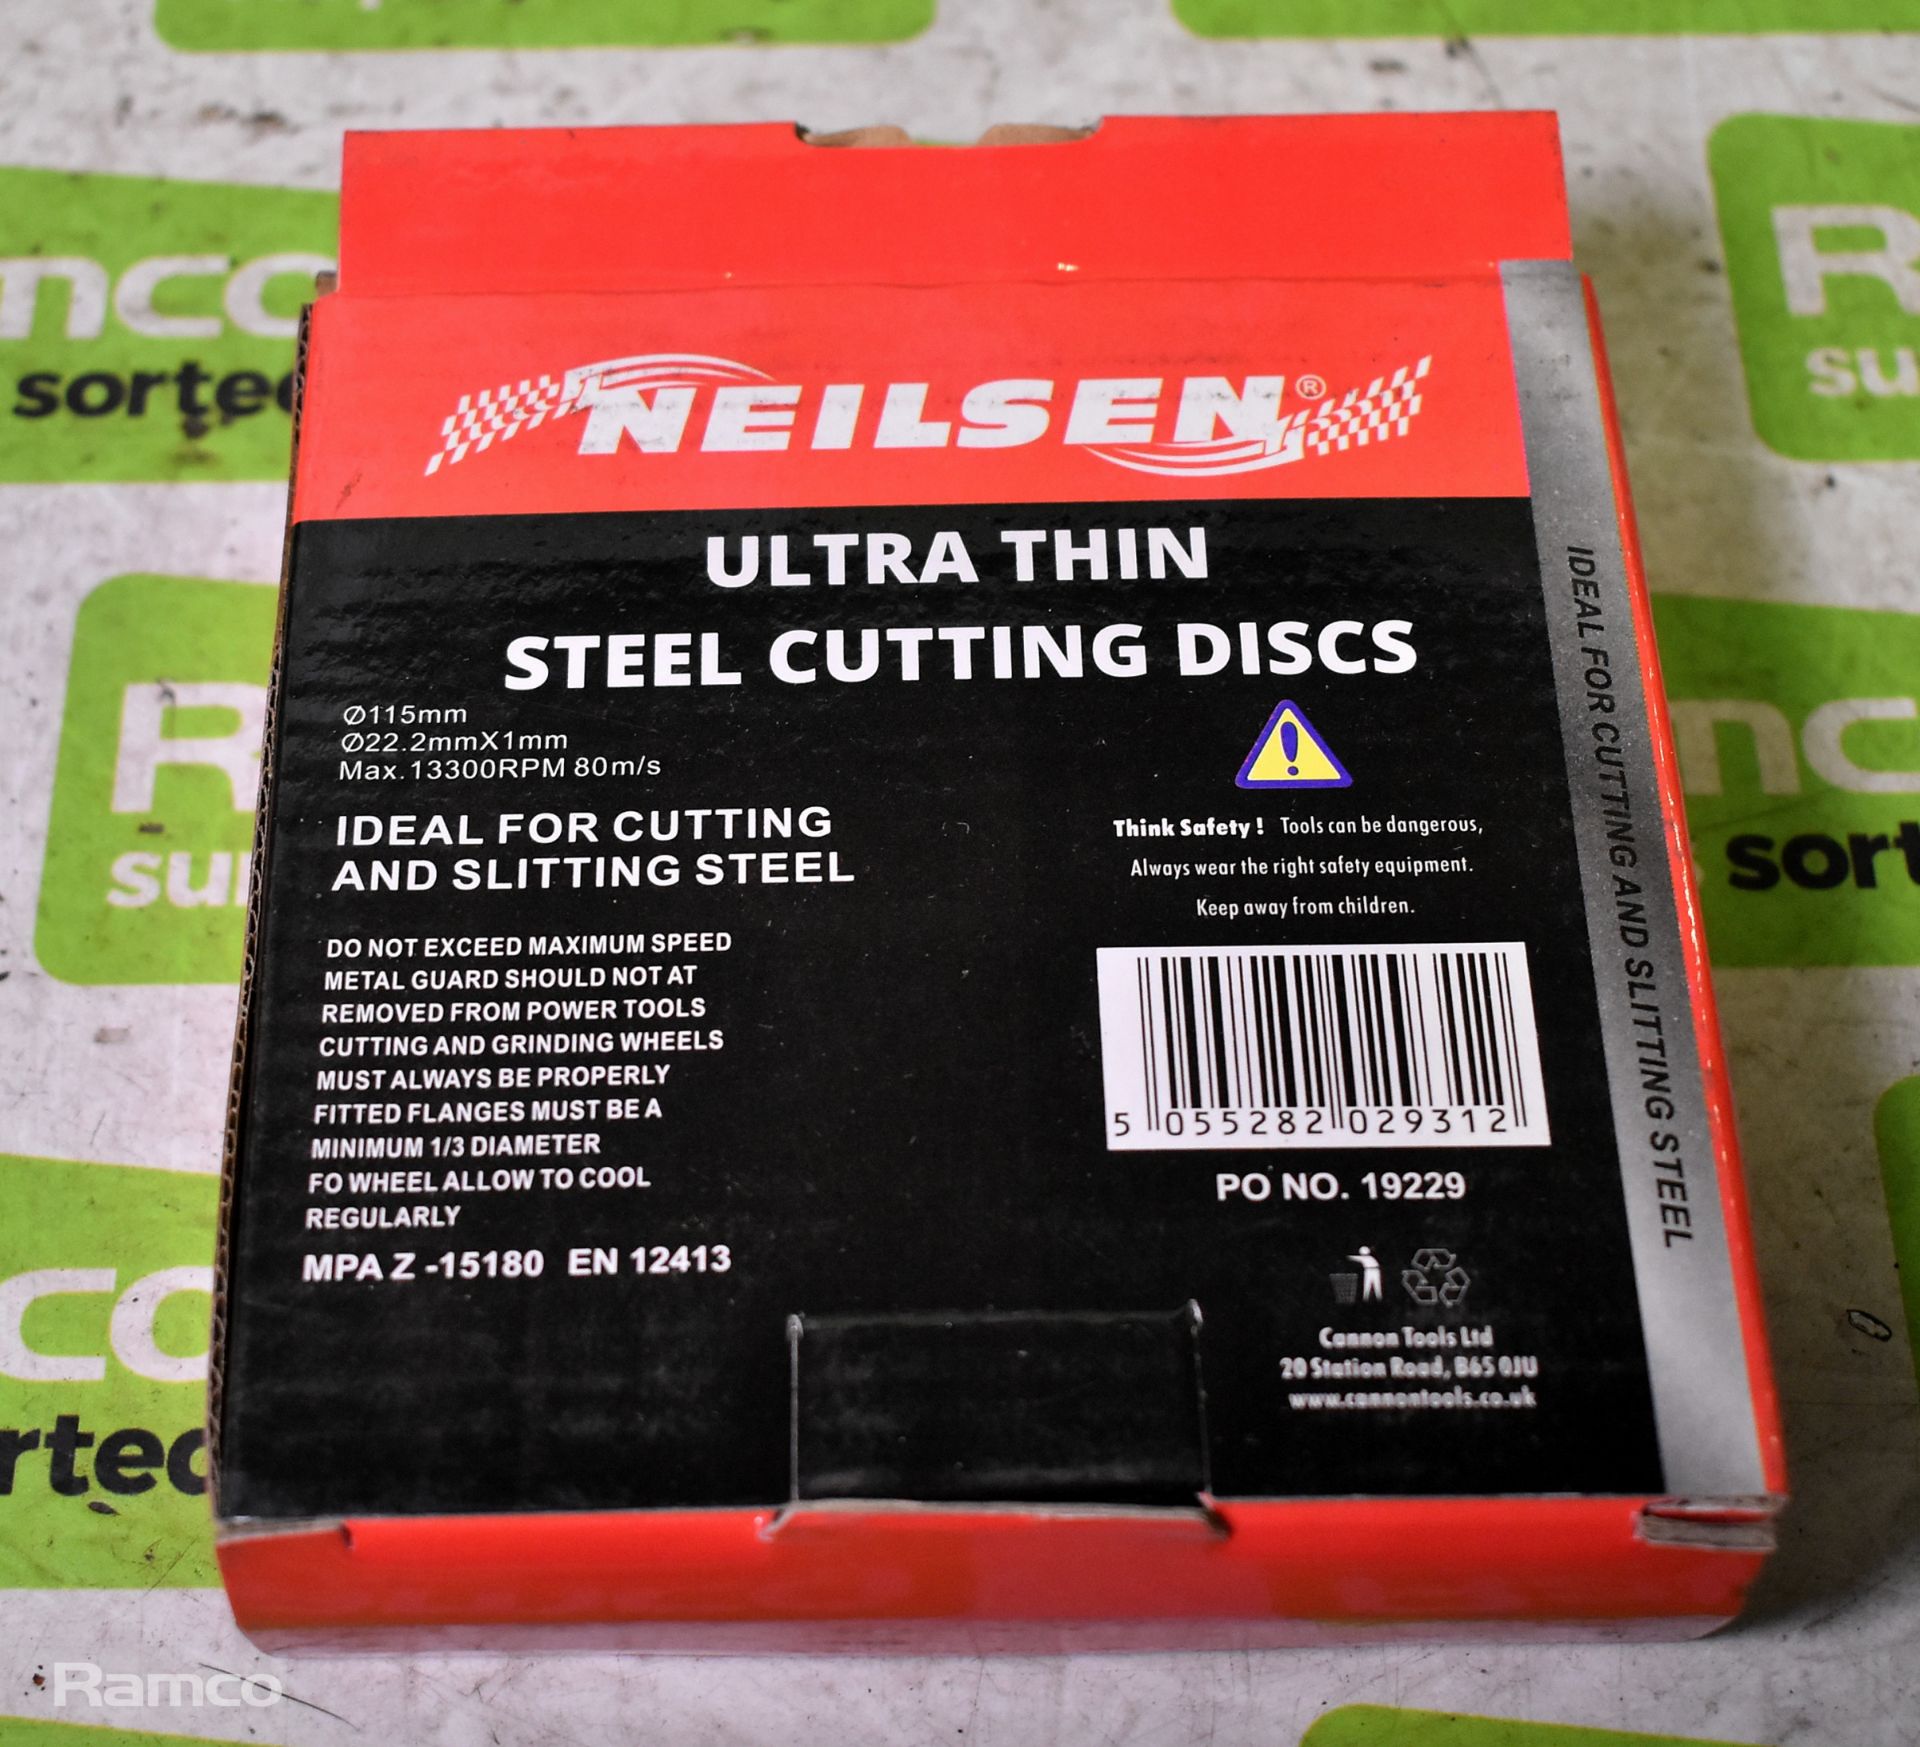 6x Dekton 80mm M14 twist knot wire cup brushes, 5x packs of Neilson steel ultra cutting discs - Image 12 of 12